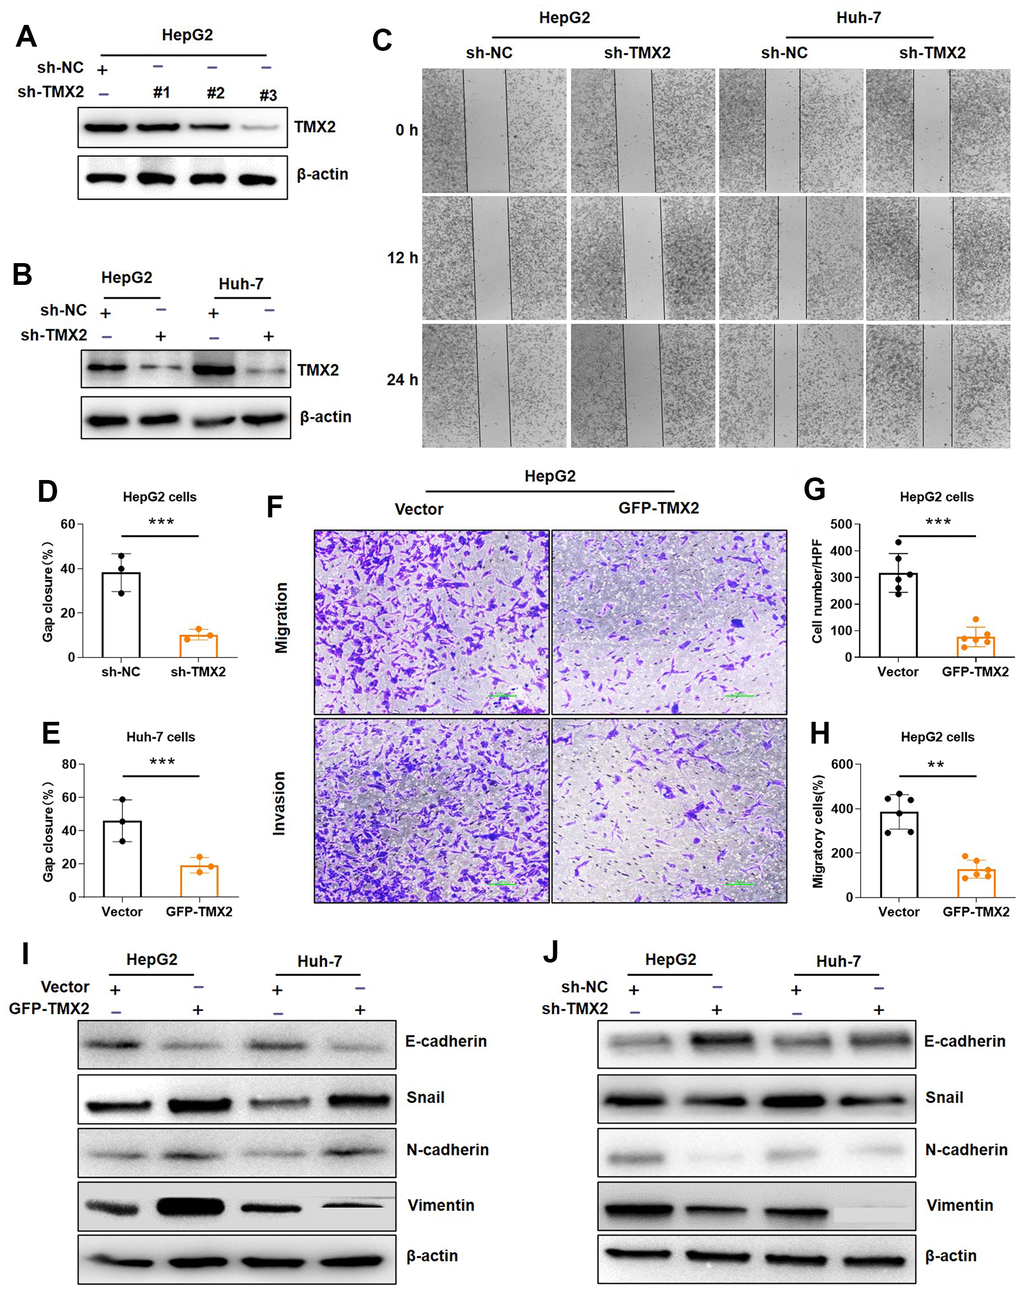 TMX2 promotes epithelial-mesenchymal transition (EMT) in liver cancer cells. Verification of sh-TMX2 (A). Transfection analysis of TMX2 (B). Microscopic observations were recorded at 0, 12, and 24 h after scratching the surface of a confluent layer of the indicated HepG2 and Huh-7 cells (C). Quantitative analysis of wound healing percentage in HepG2 cells (D). Quantitative analysis of wound healing percentage in Huh-7 cells (E). The effects of TMX2 on cell migration and invasion were examined by transwell assays in HepG2 cells (F). Quantitative analysis of cell migration in HepG2 cells (G). Quantitative analysis of cell invasion in HepG-2 cells (H). Western blot analysis of EMT marker expression in TMX2-overexpressing HepG2 and Huh-7 cells (I). Western blot analysis of EMT marker expression in TMX2-deficient HepG2 and Huh-7 cells (J). *p 